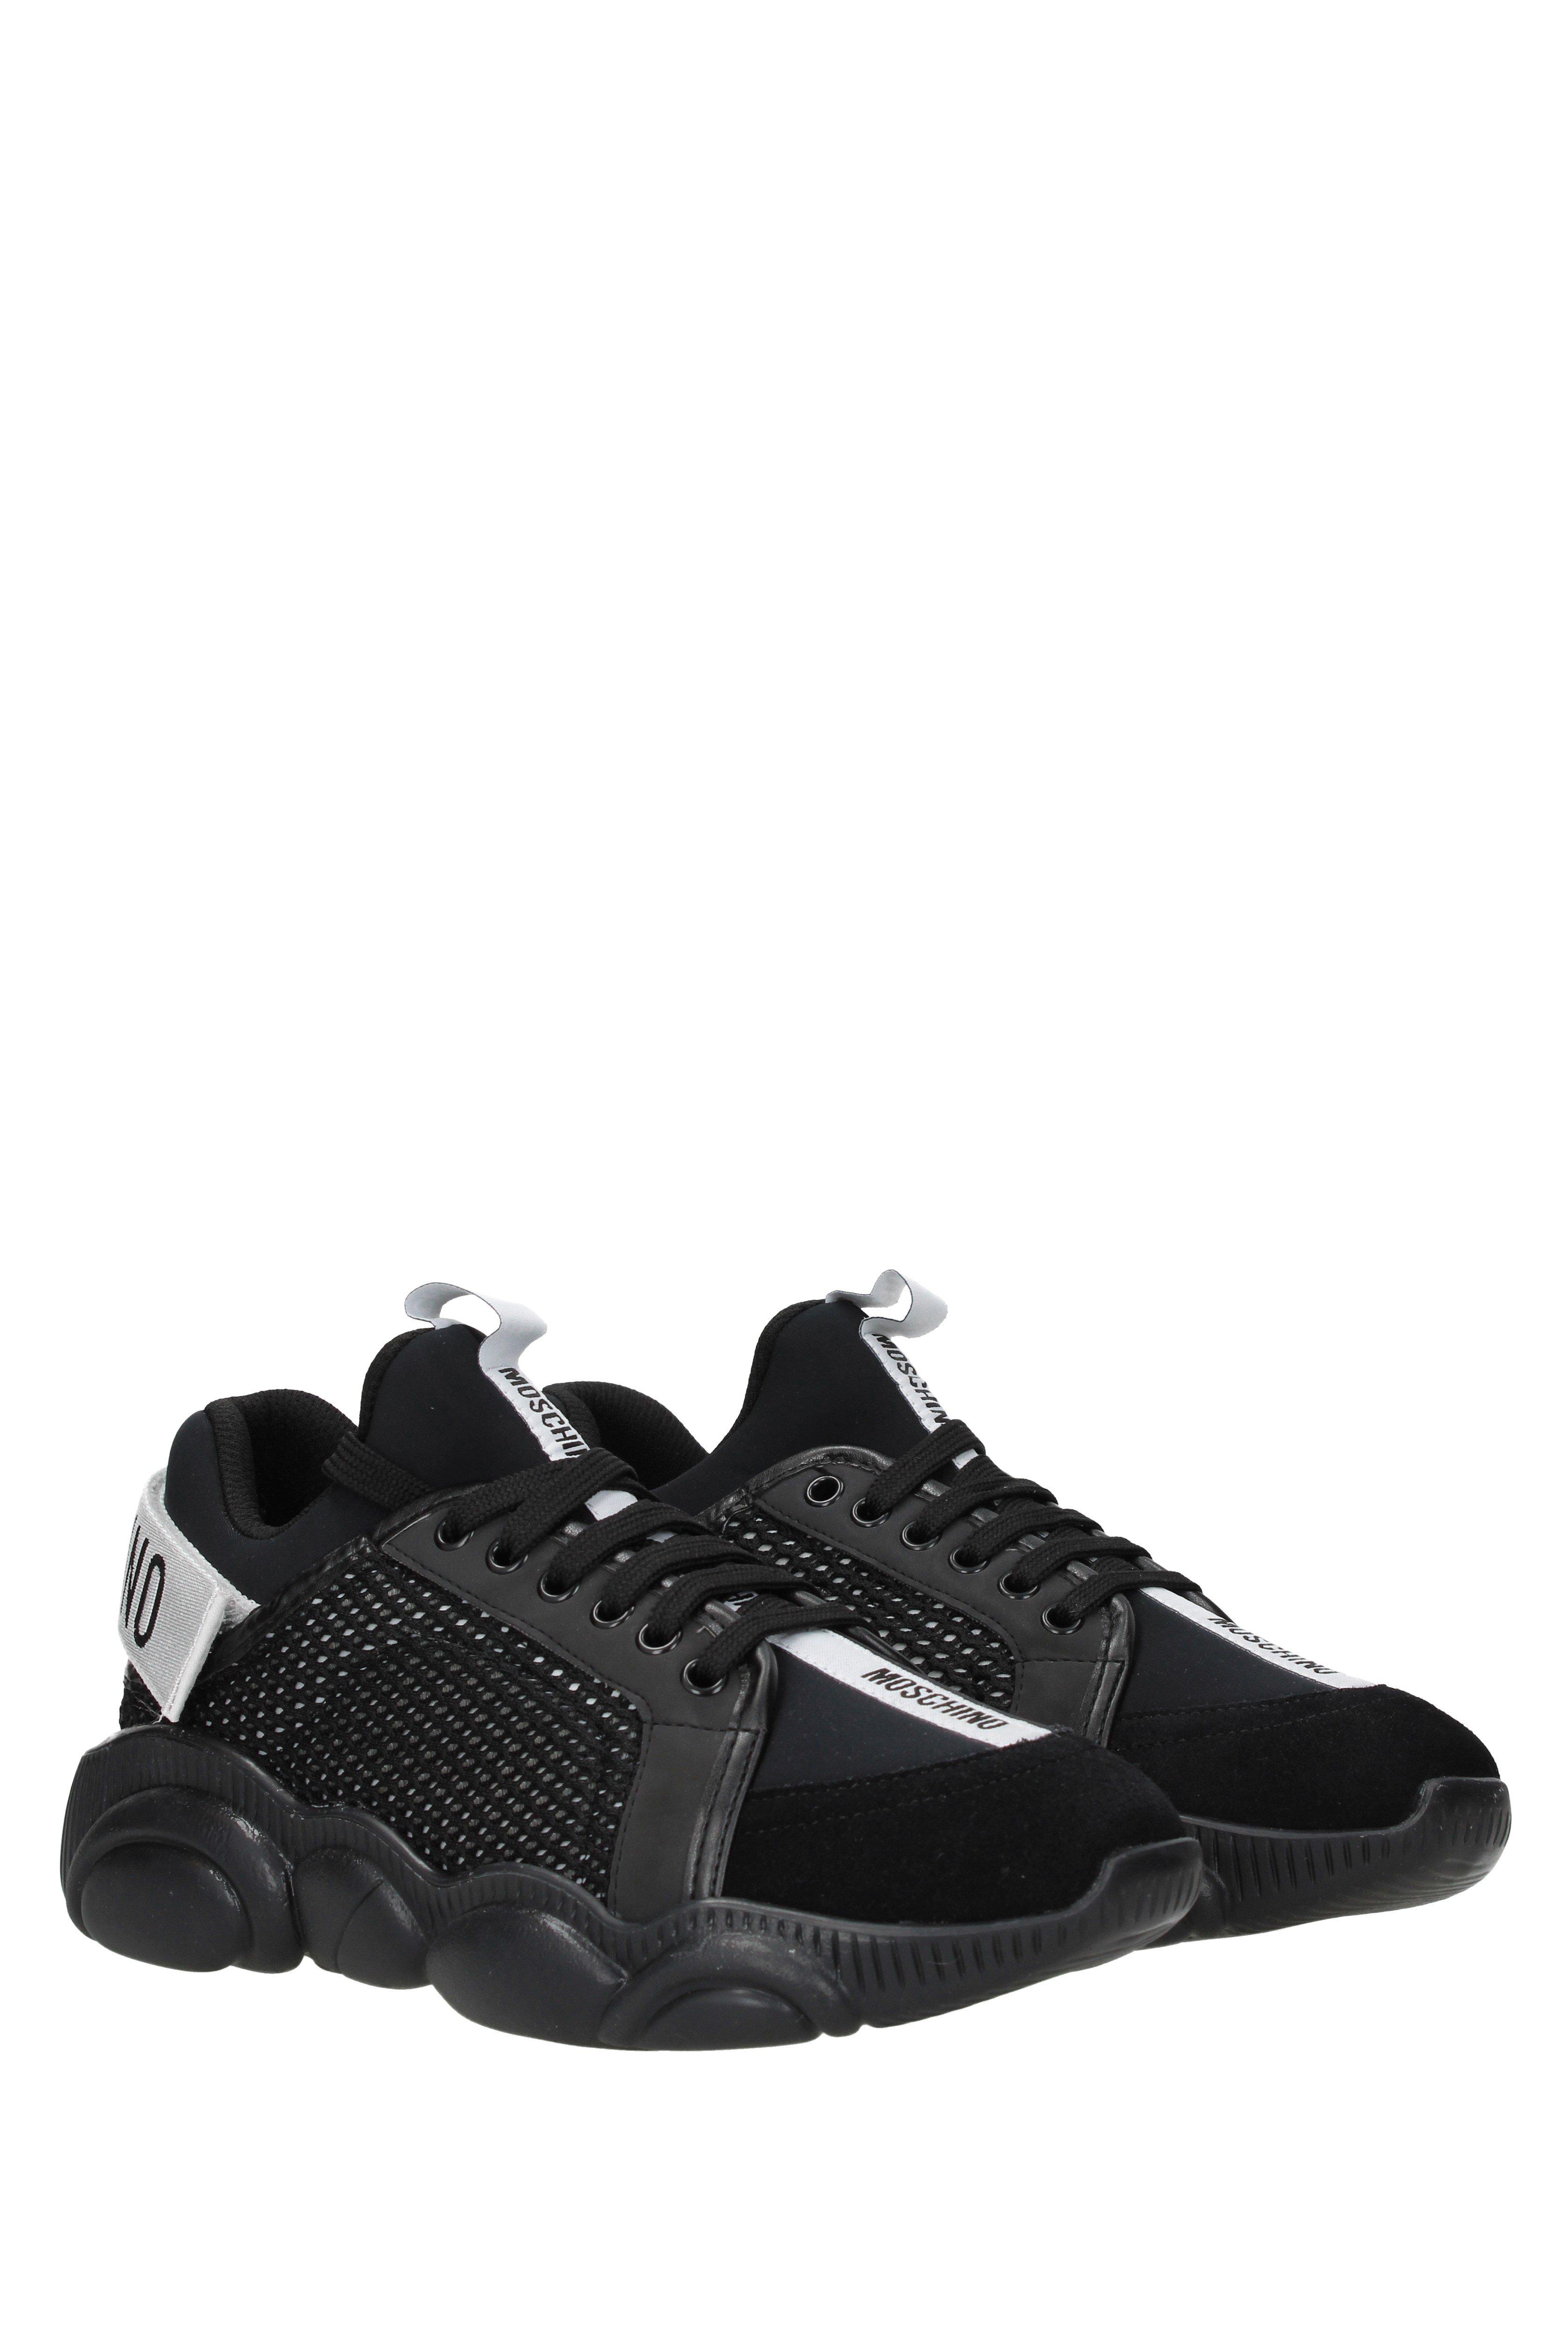 Moschino Black Sneakers - Lyst